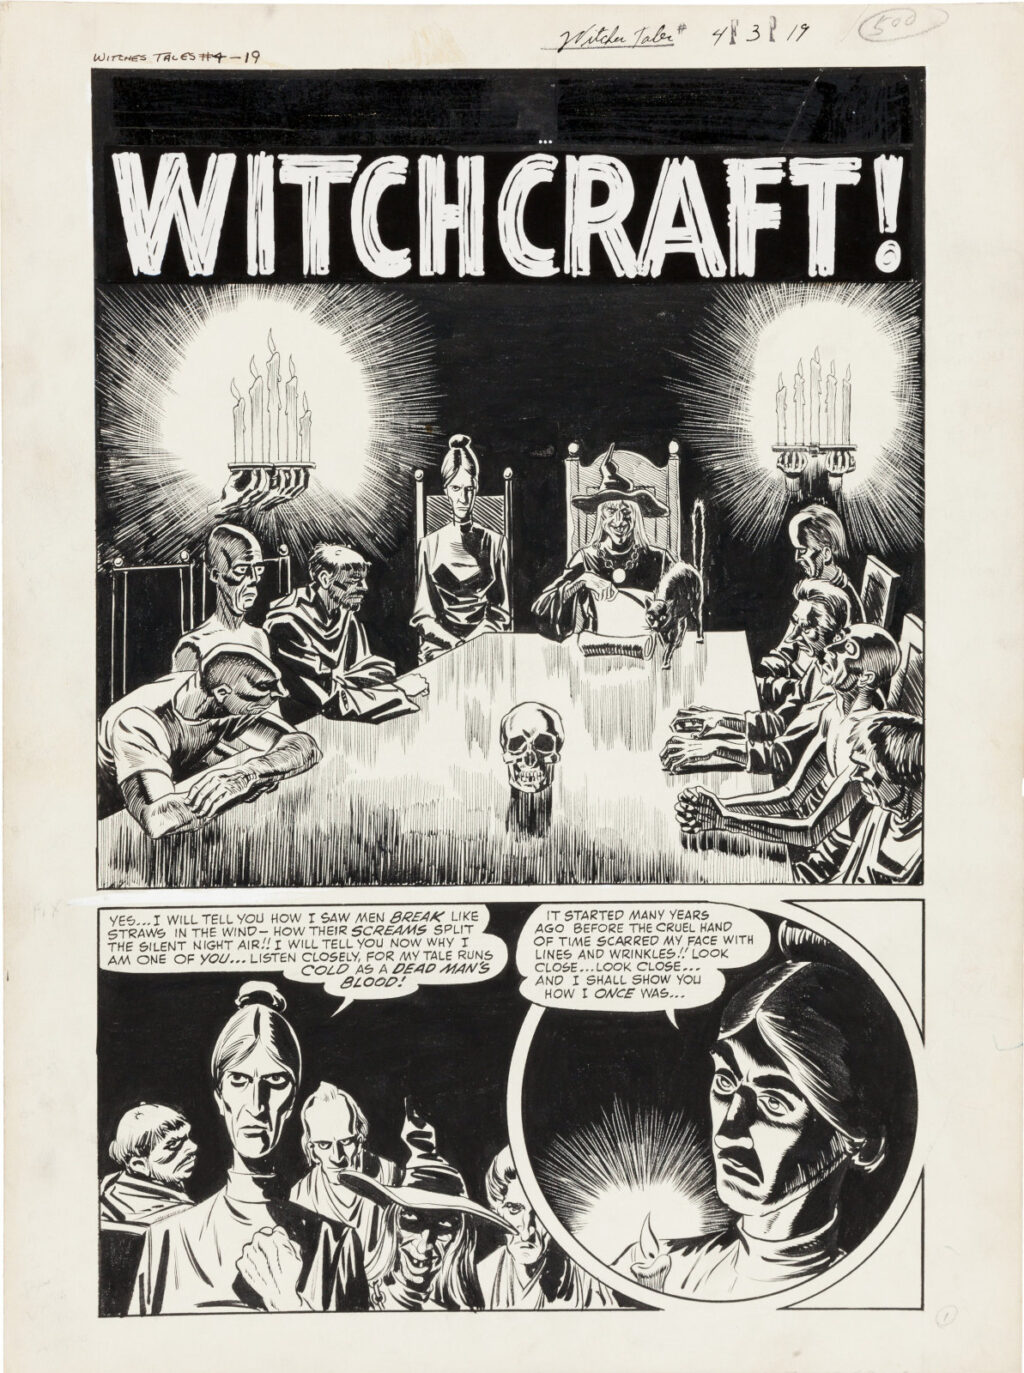 Witches Tales issue 4 splash by Rudy Palais and Vic Donahue